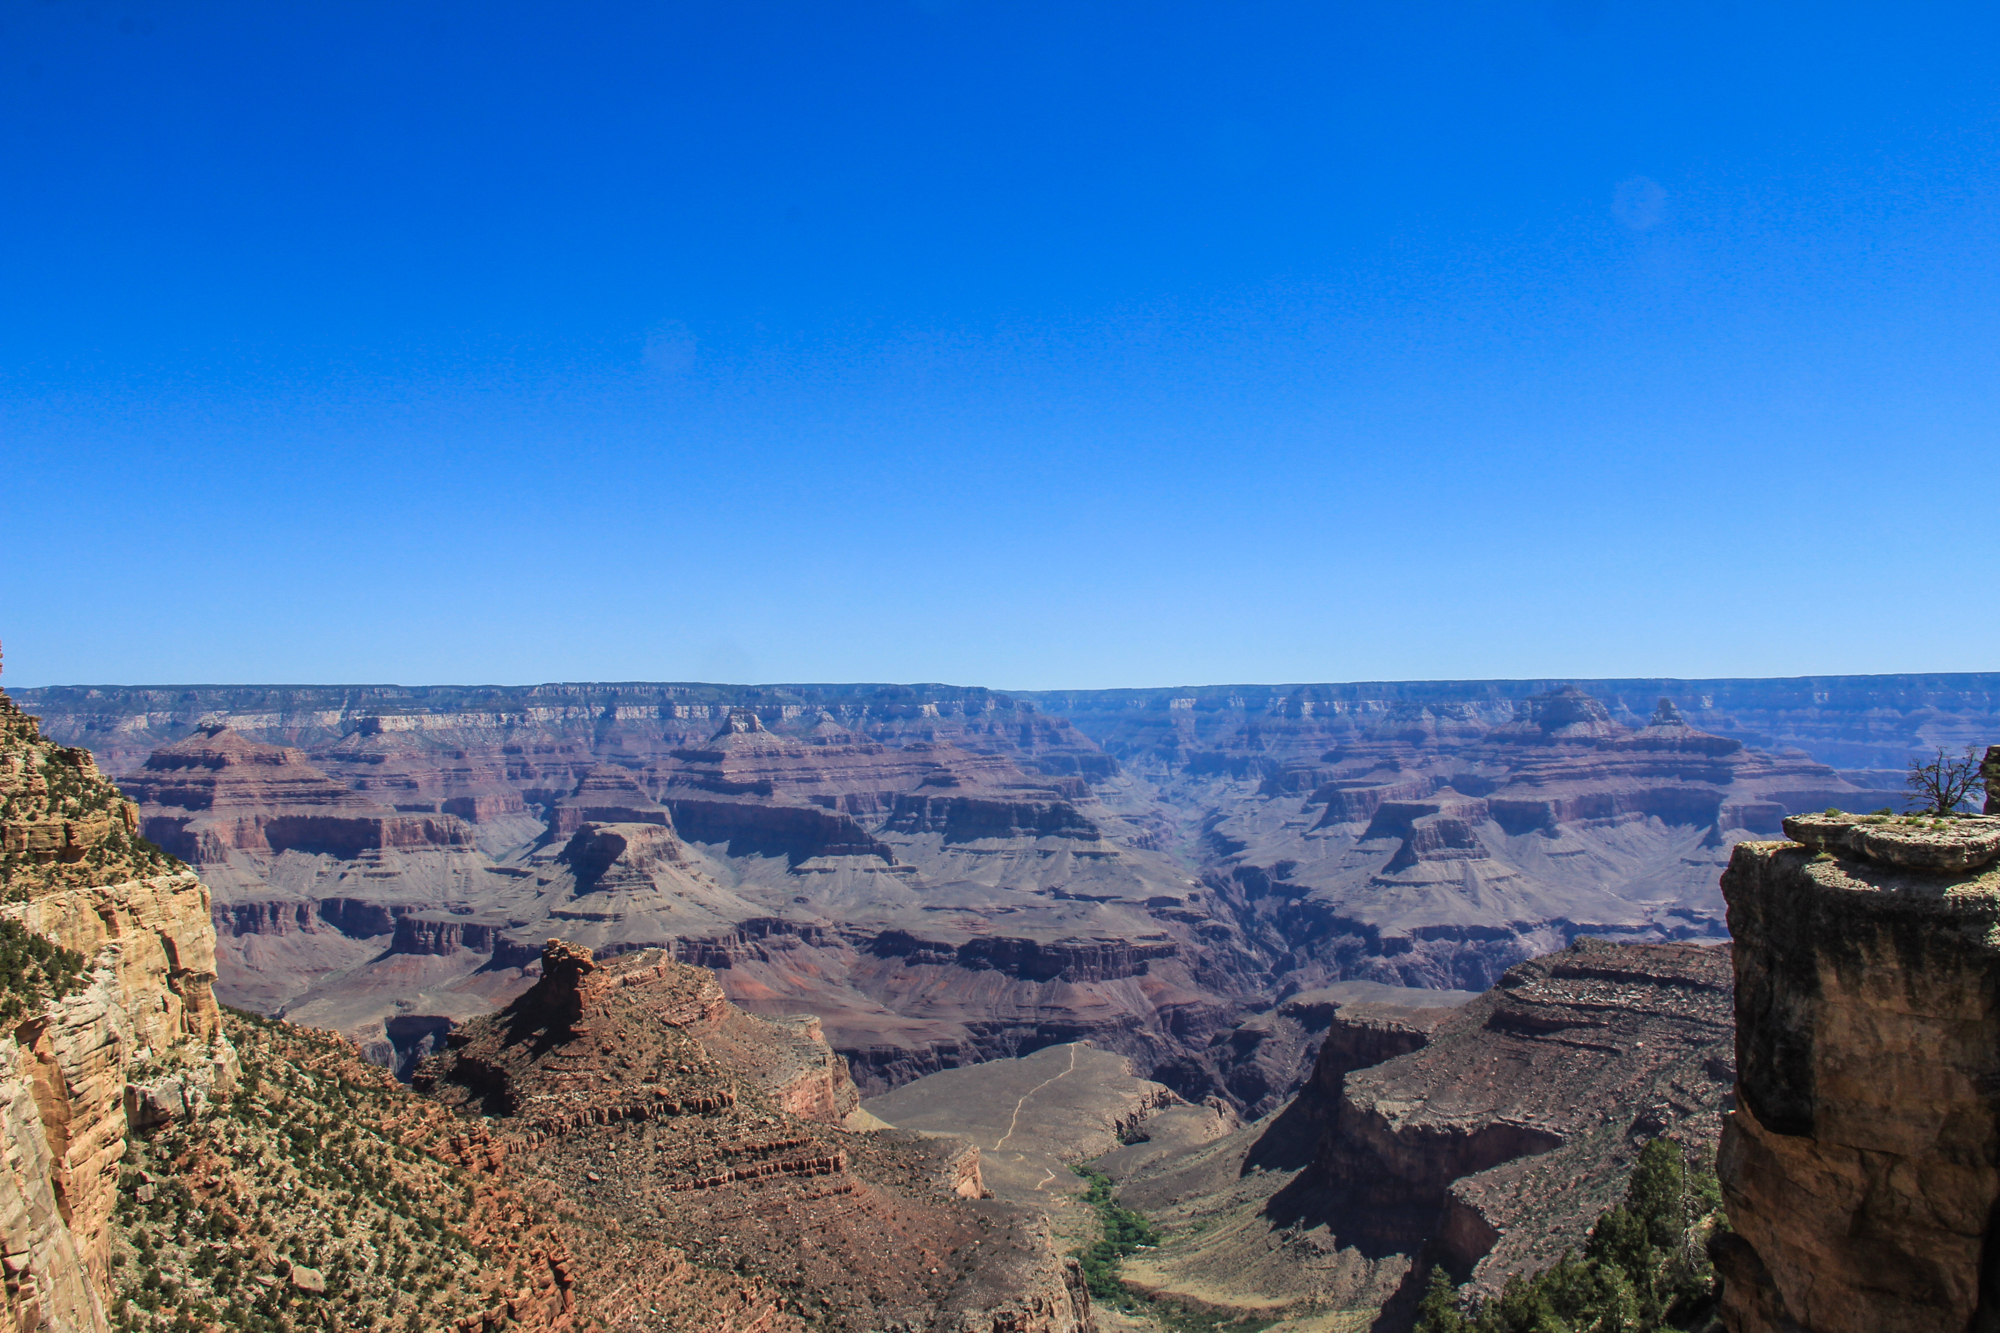 East and West Side of the Grand Canyon